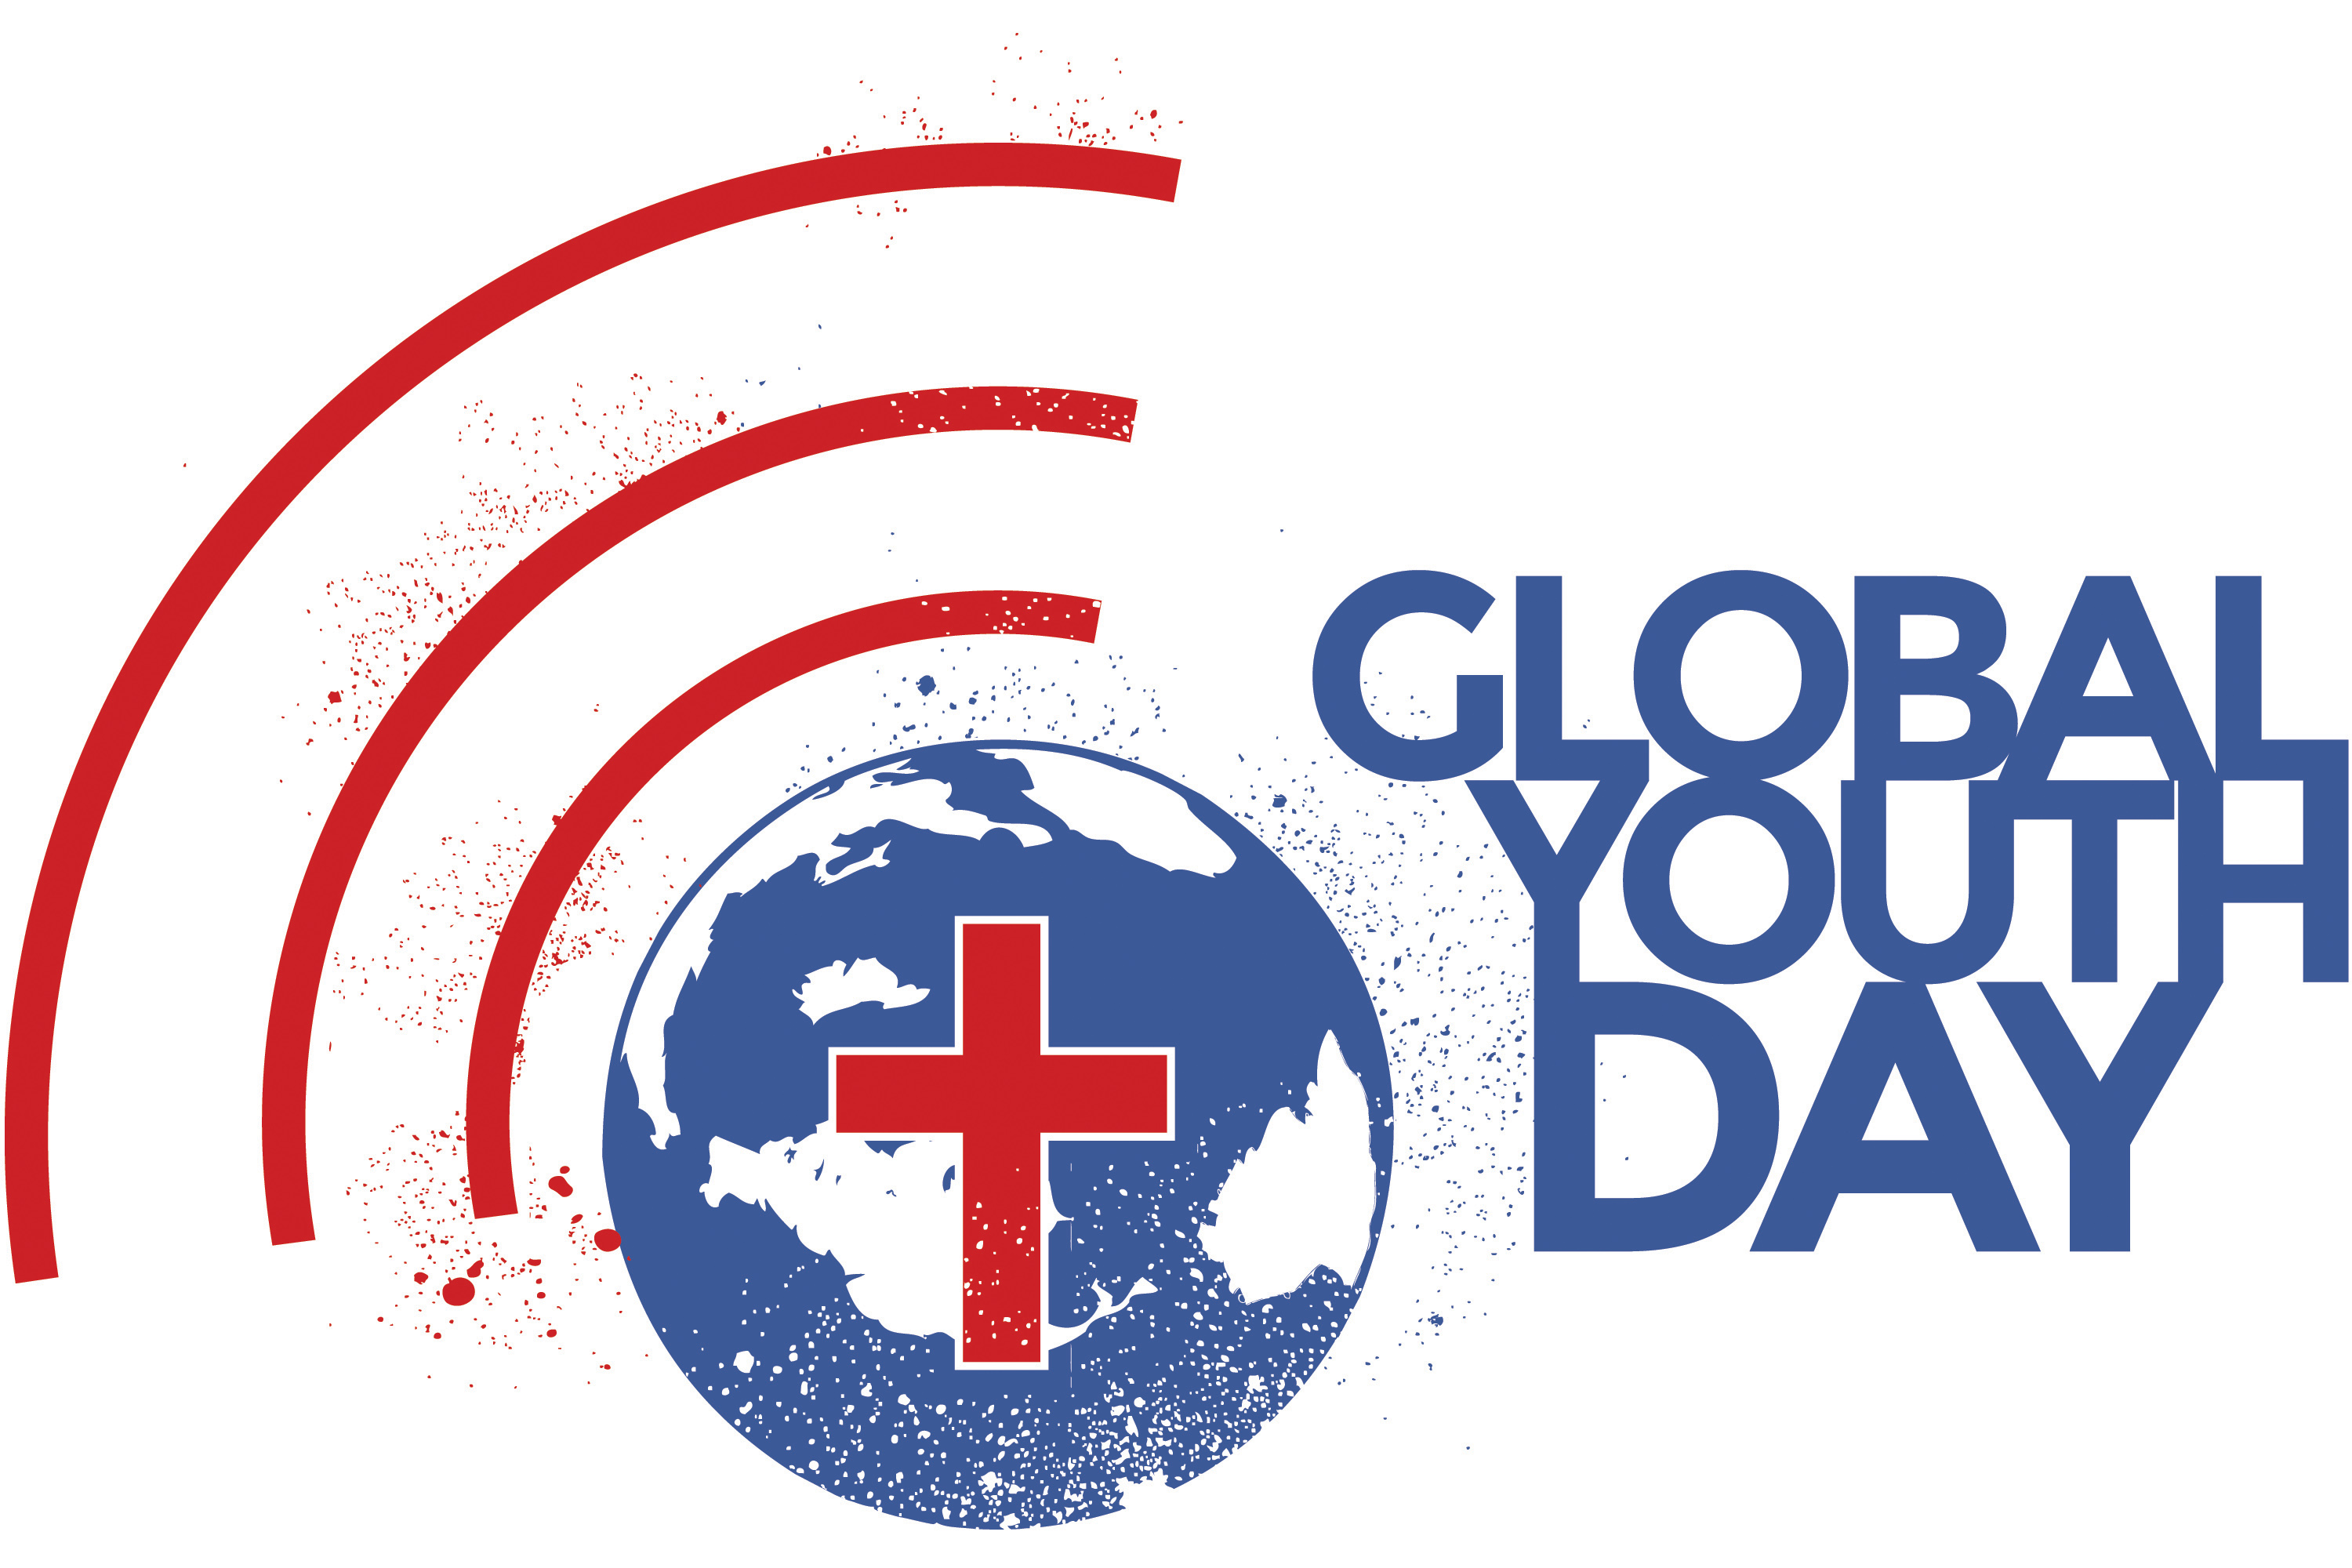 Global Youth Day 2019